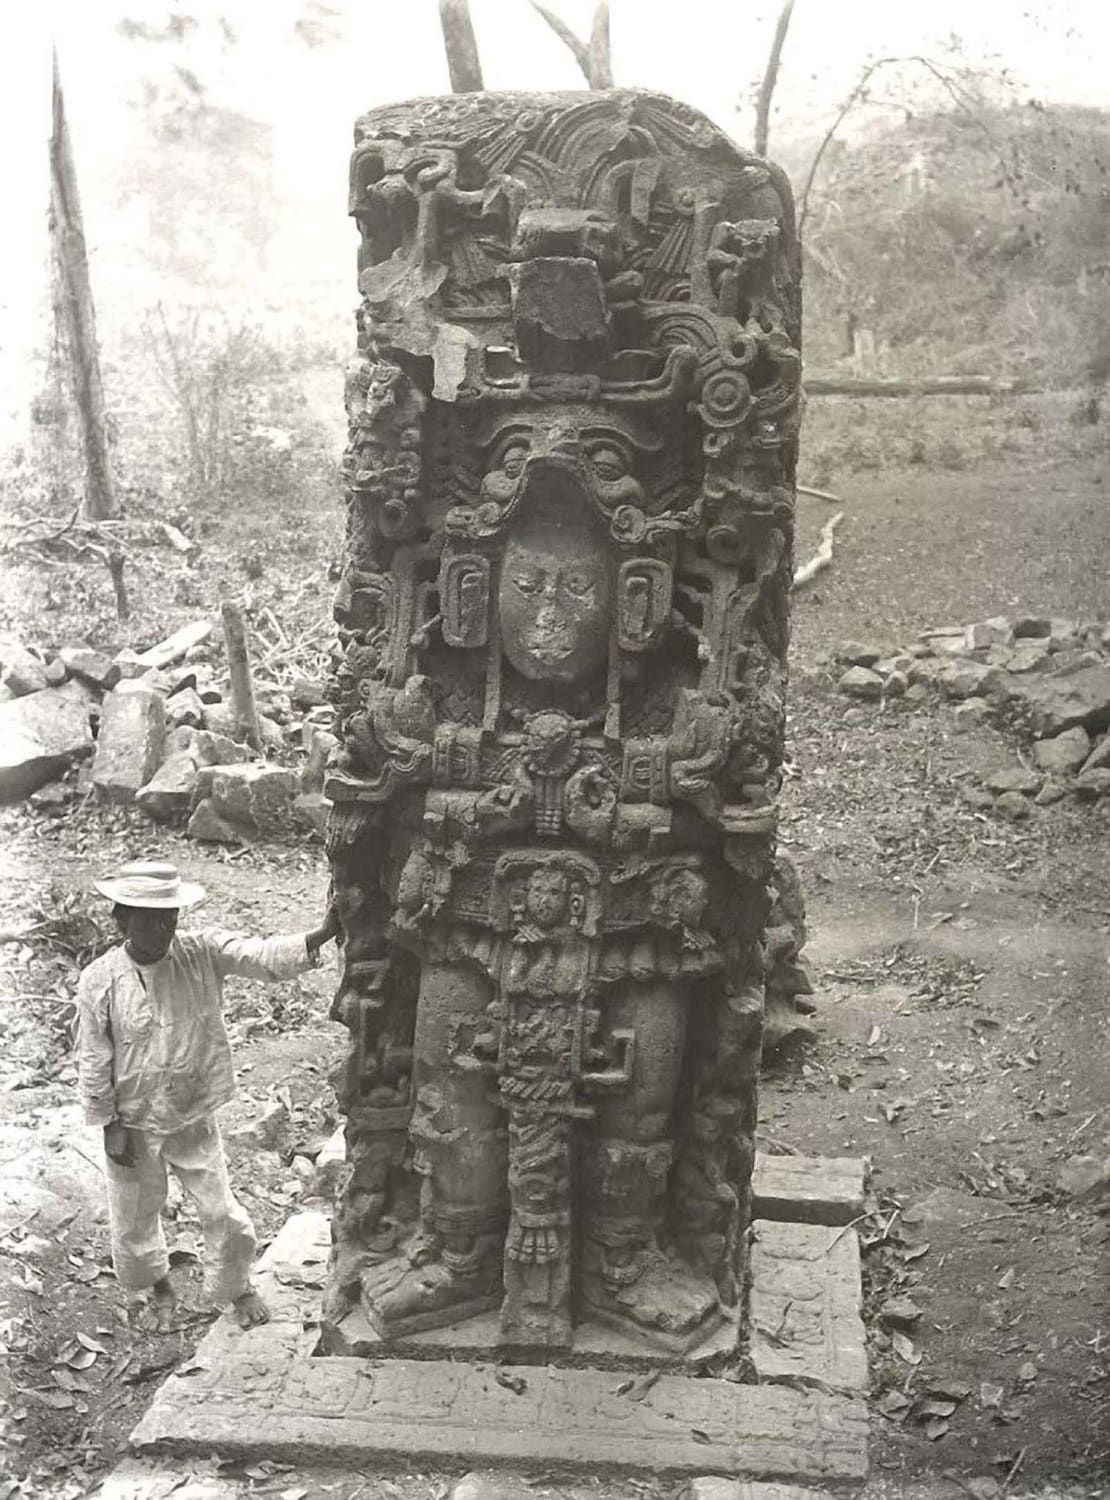 Vintage photos documenting the discovery of Maya ruins, 1880-1900